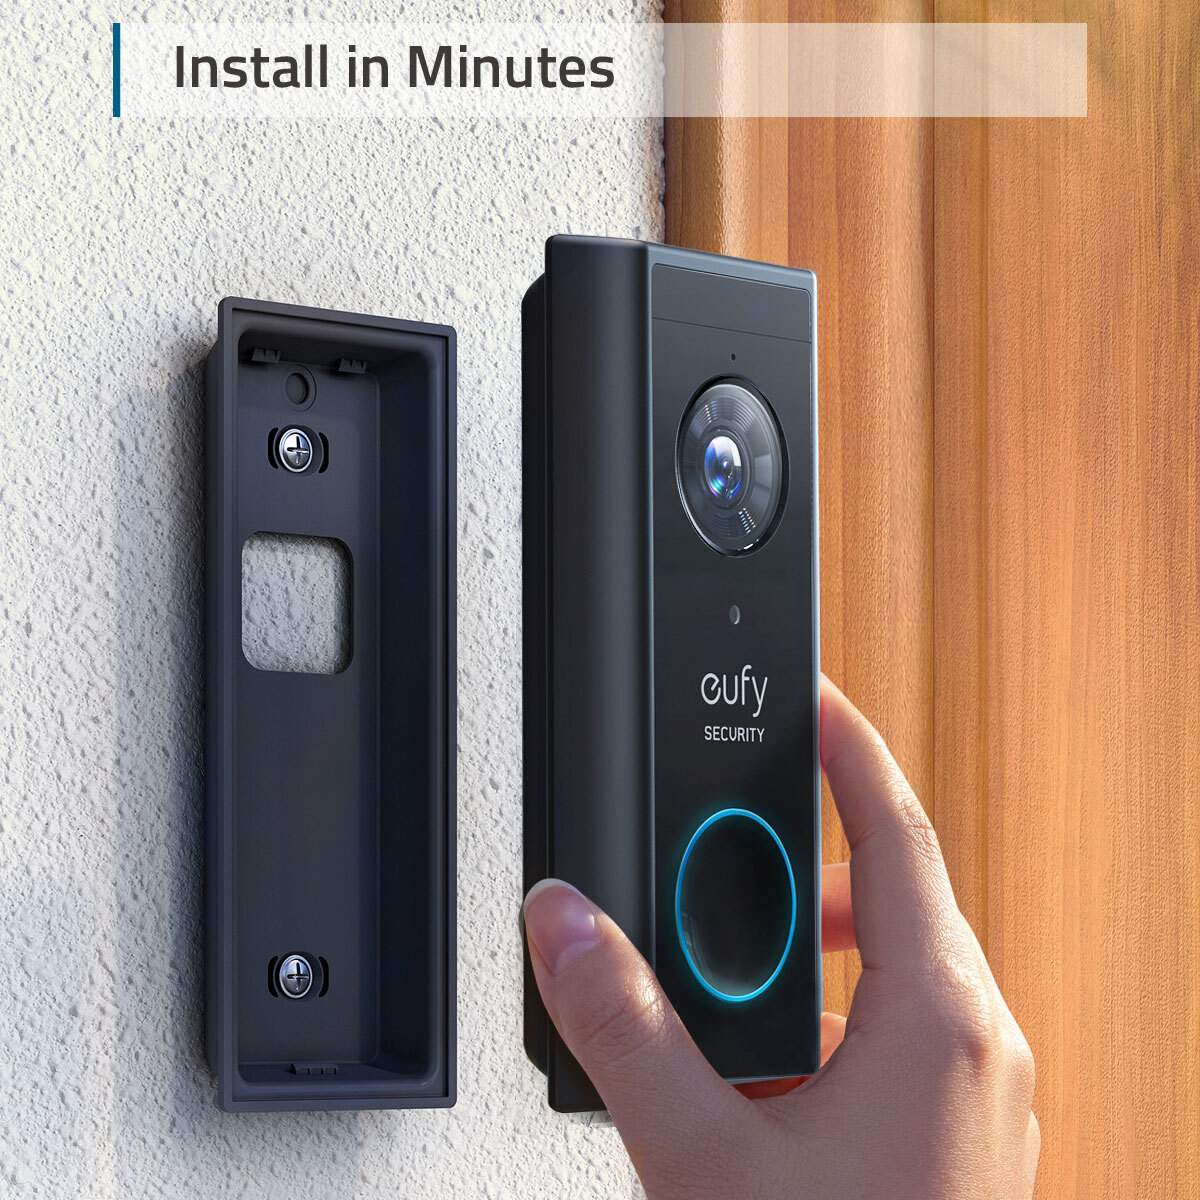 Lifestyle image showcasing ease of installation for doorbell